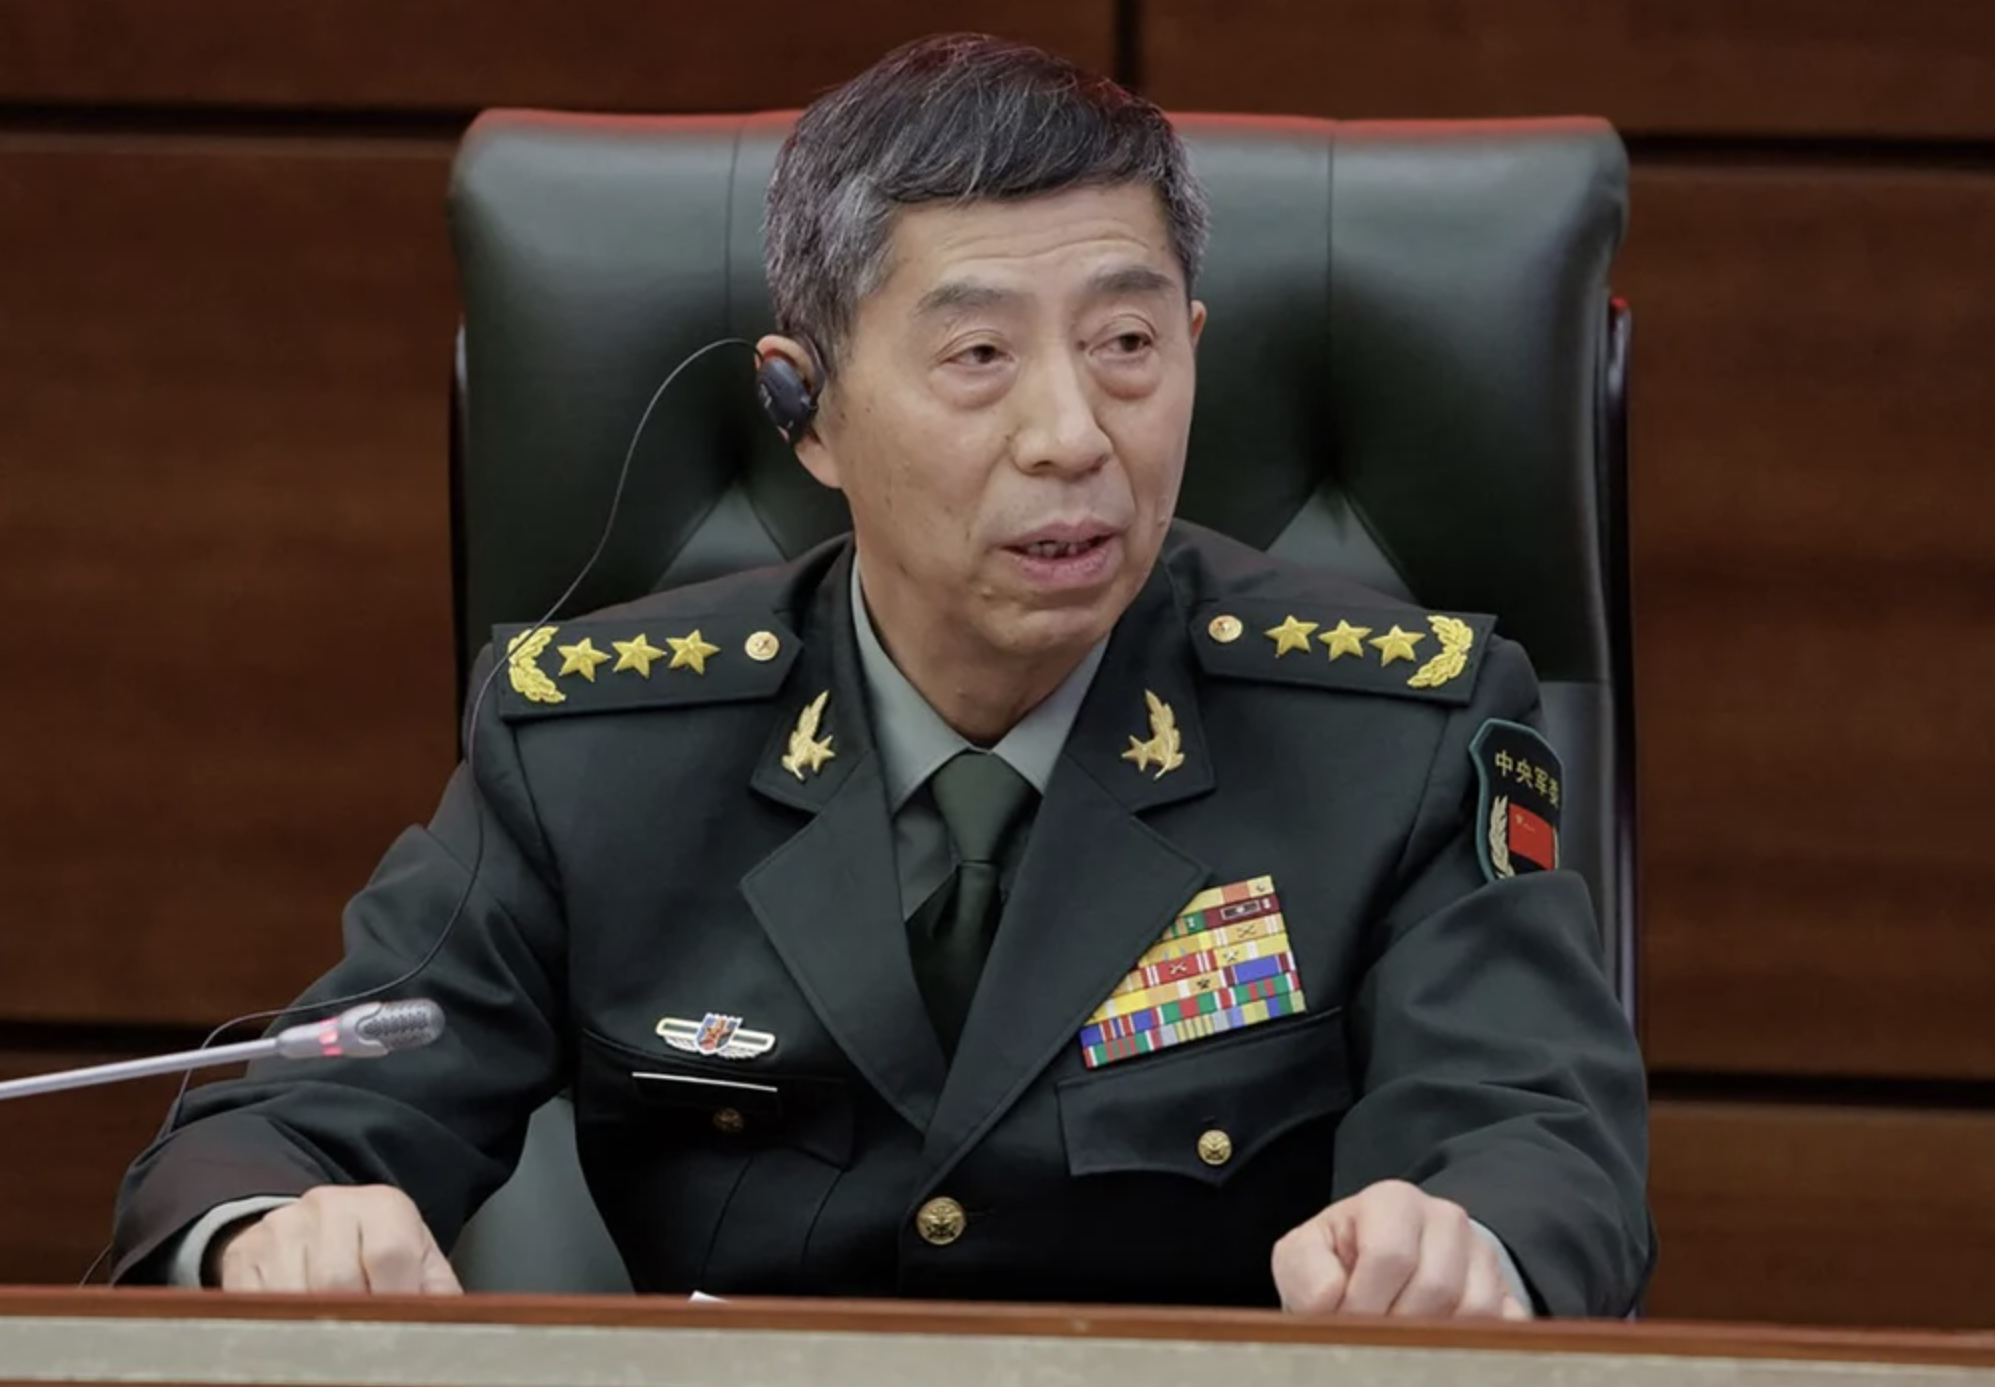 Chinese Defense Minister Li Tells Foreign Militaries, ‘Mind Your Own Business' - USNI News